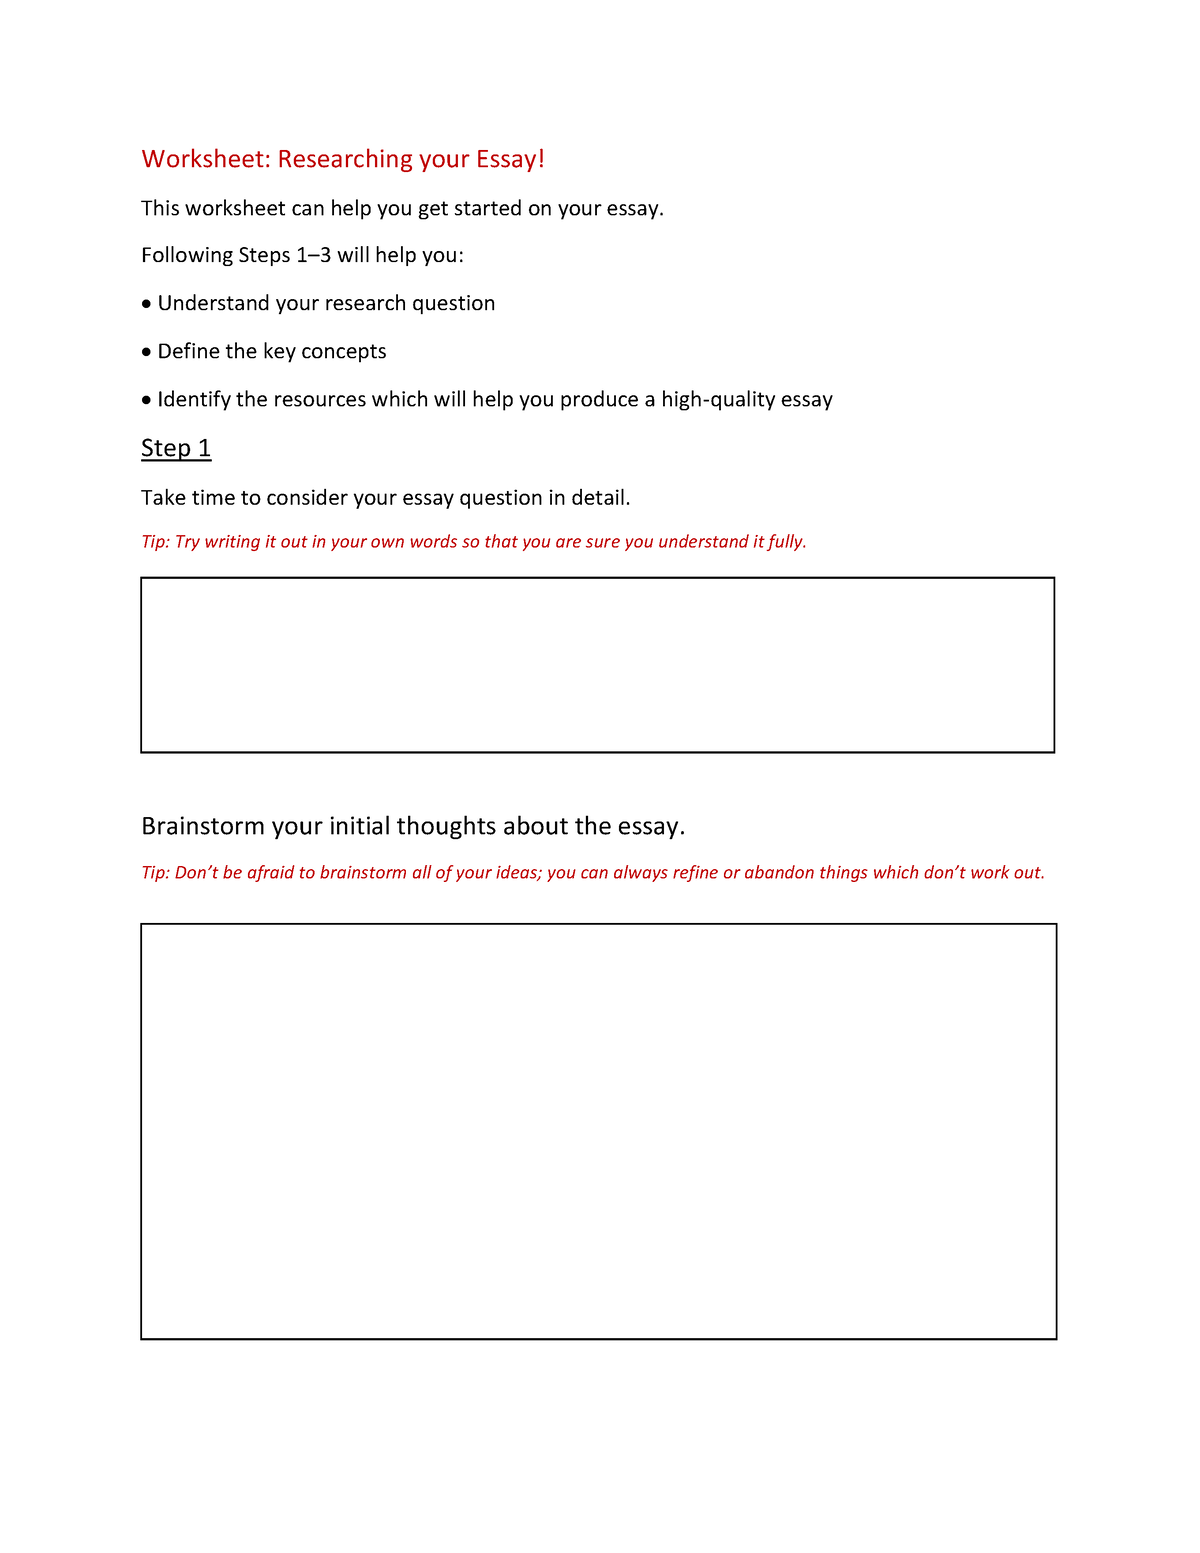 worksheet-for-researching-your-essay-worksheet-researching-your